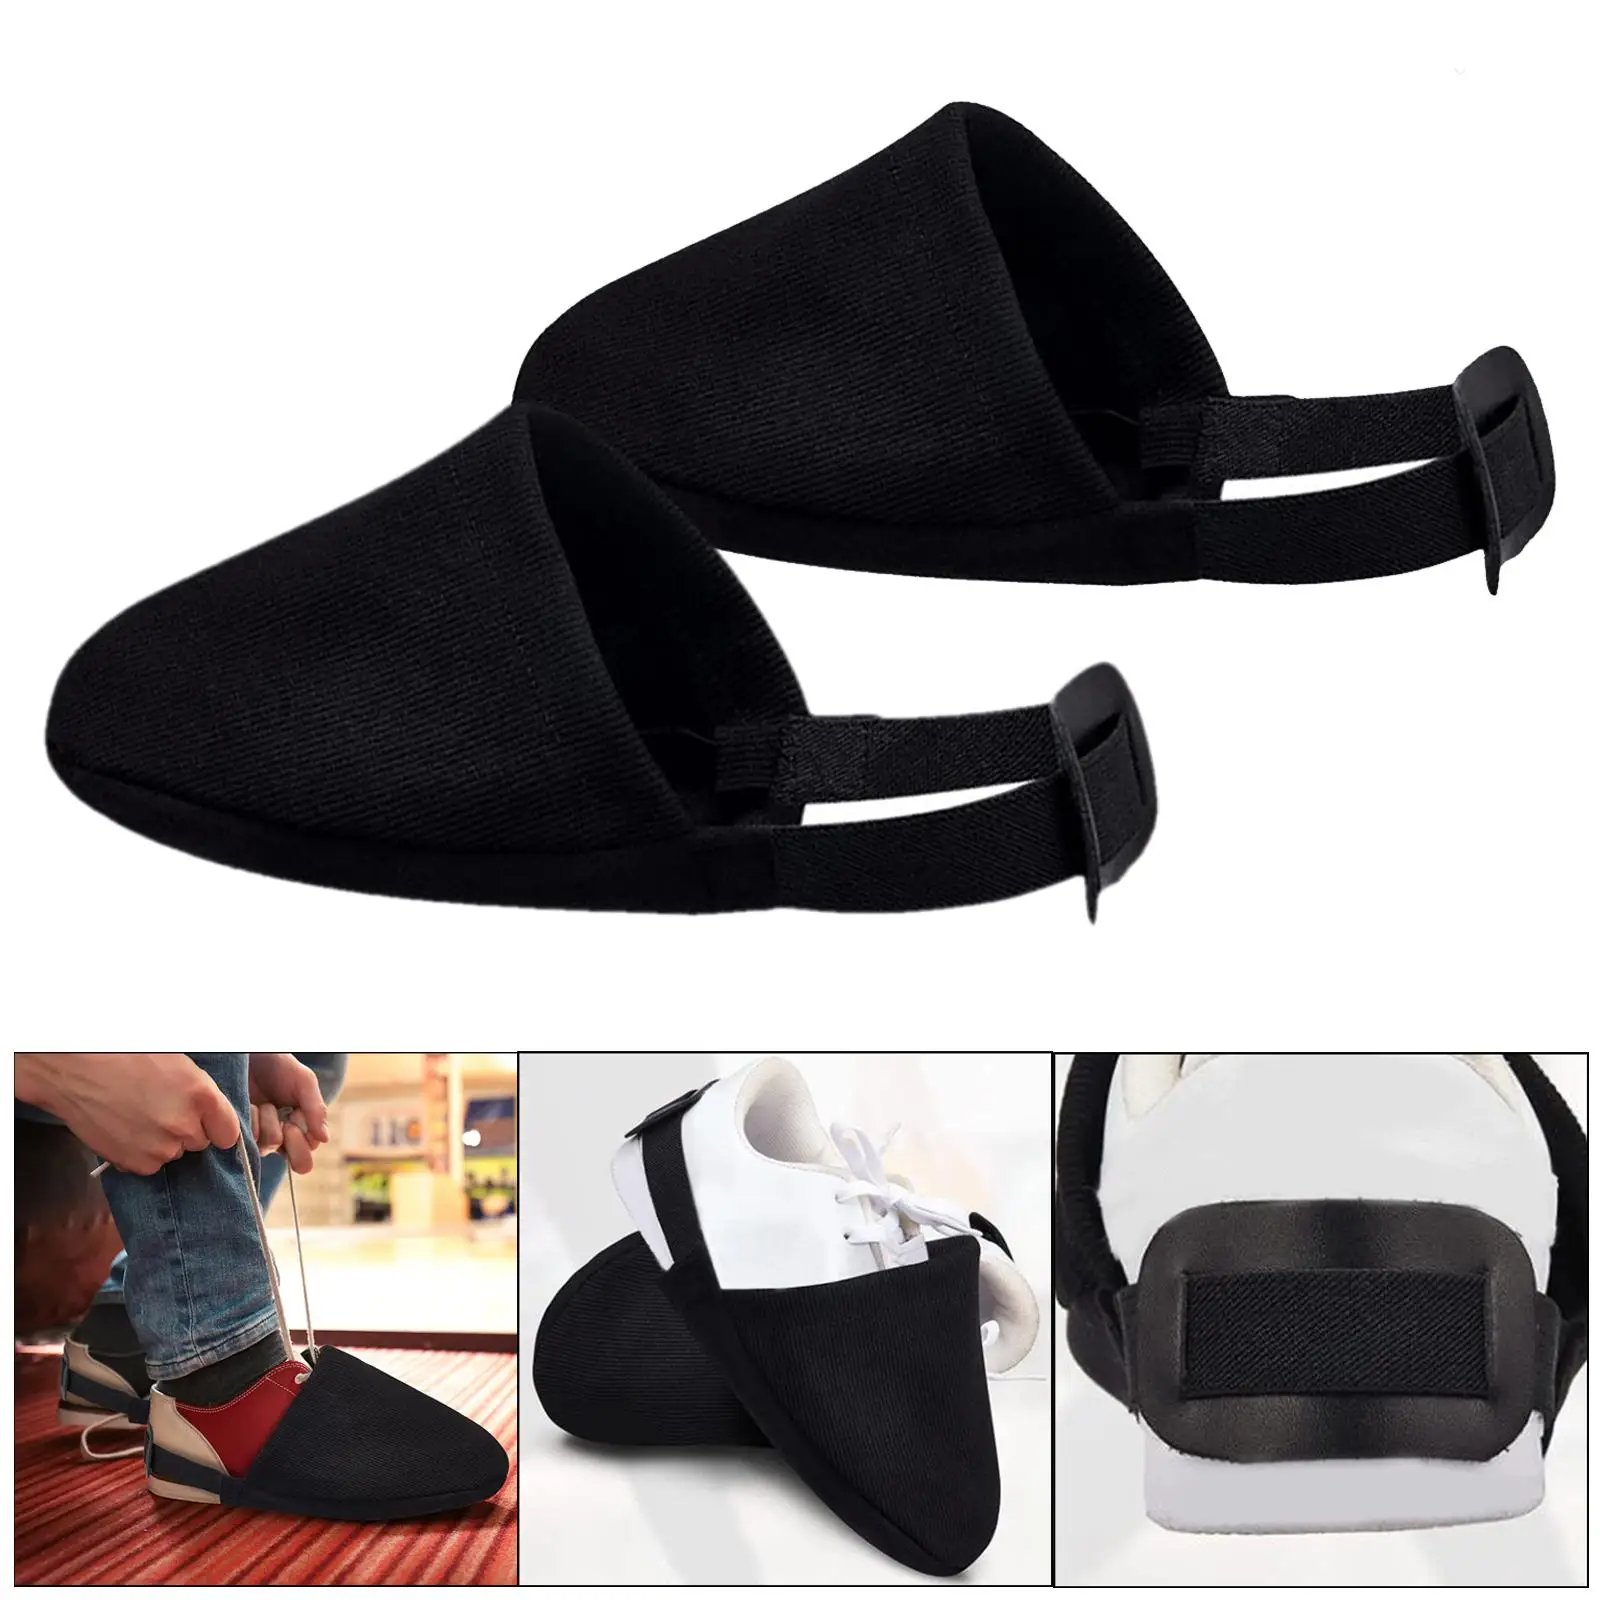 1 Pair Shoe Sliders Black Indoor Protector Covers Bowling Accessories Cleaning Unisex Bowling Shoe Cover for Carpet Adults Kids